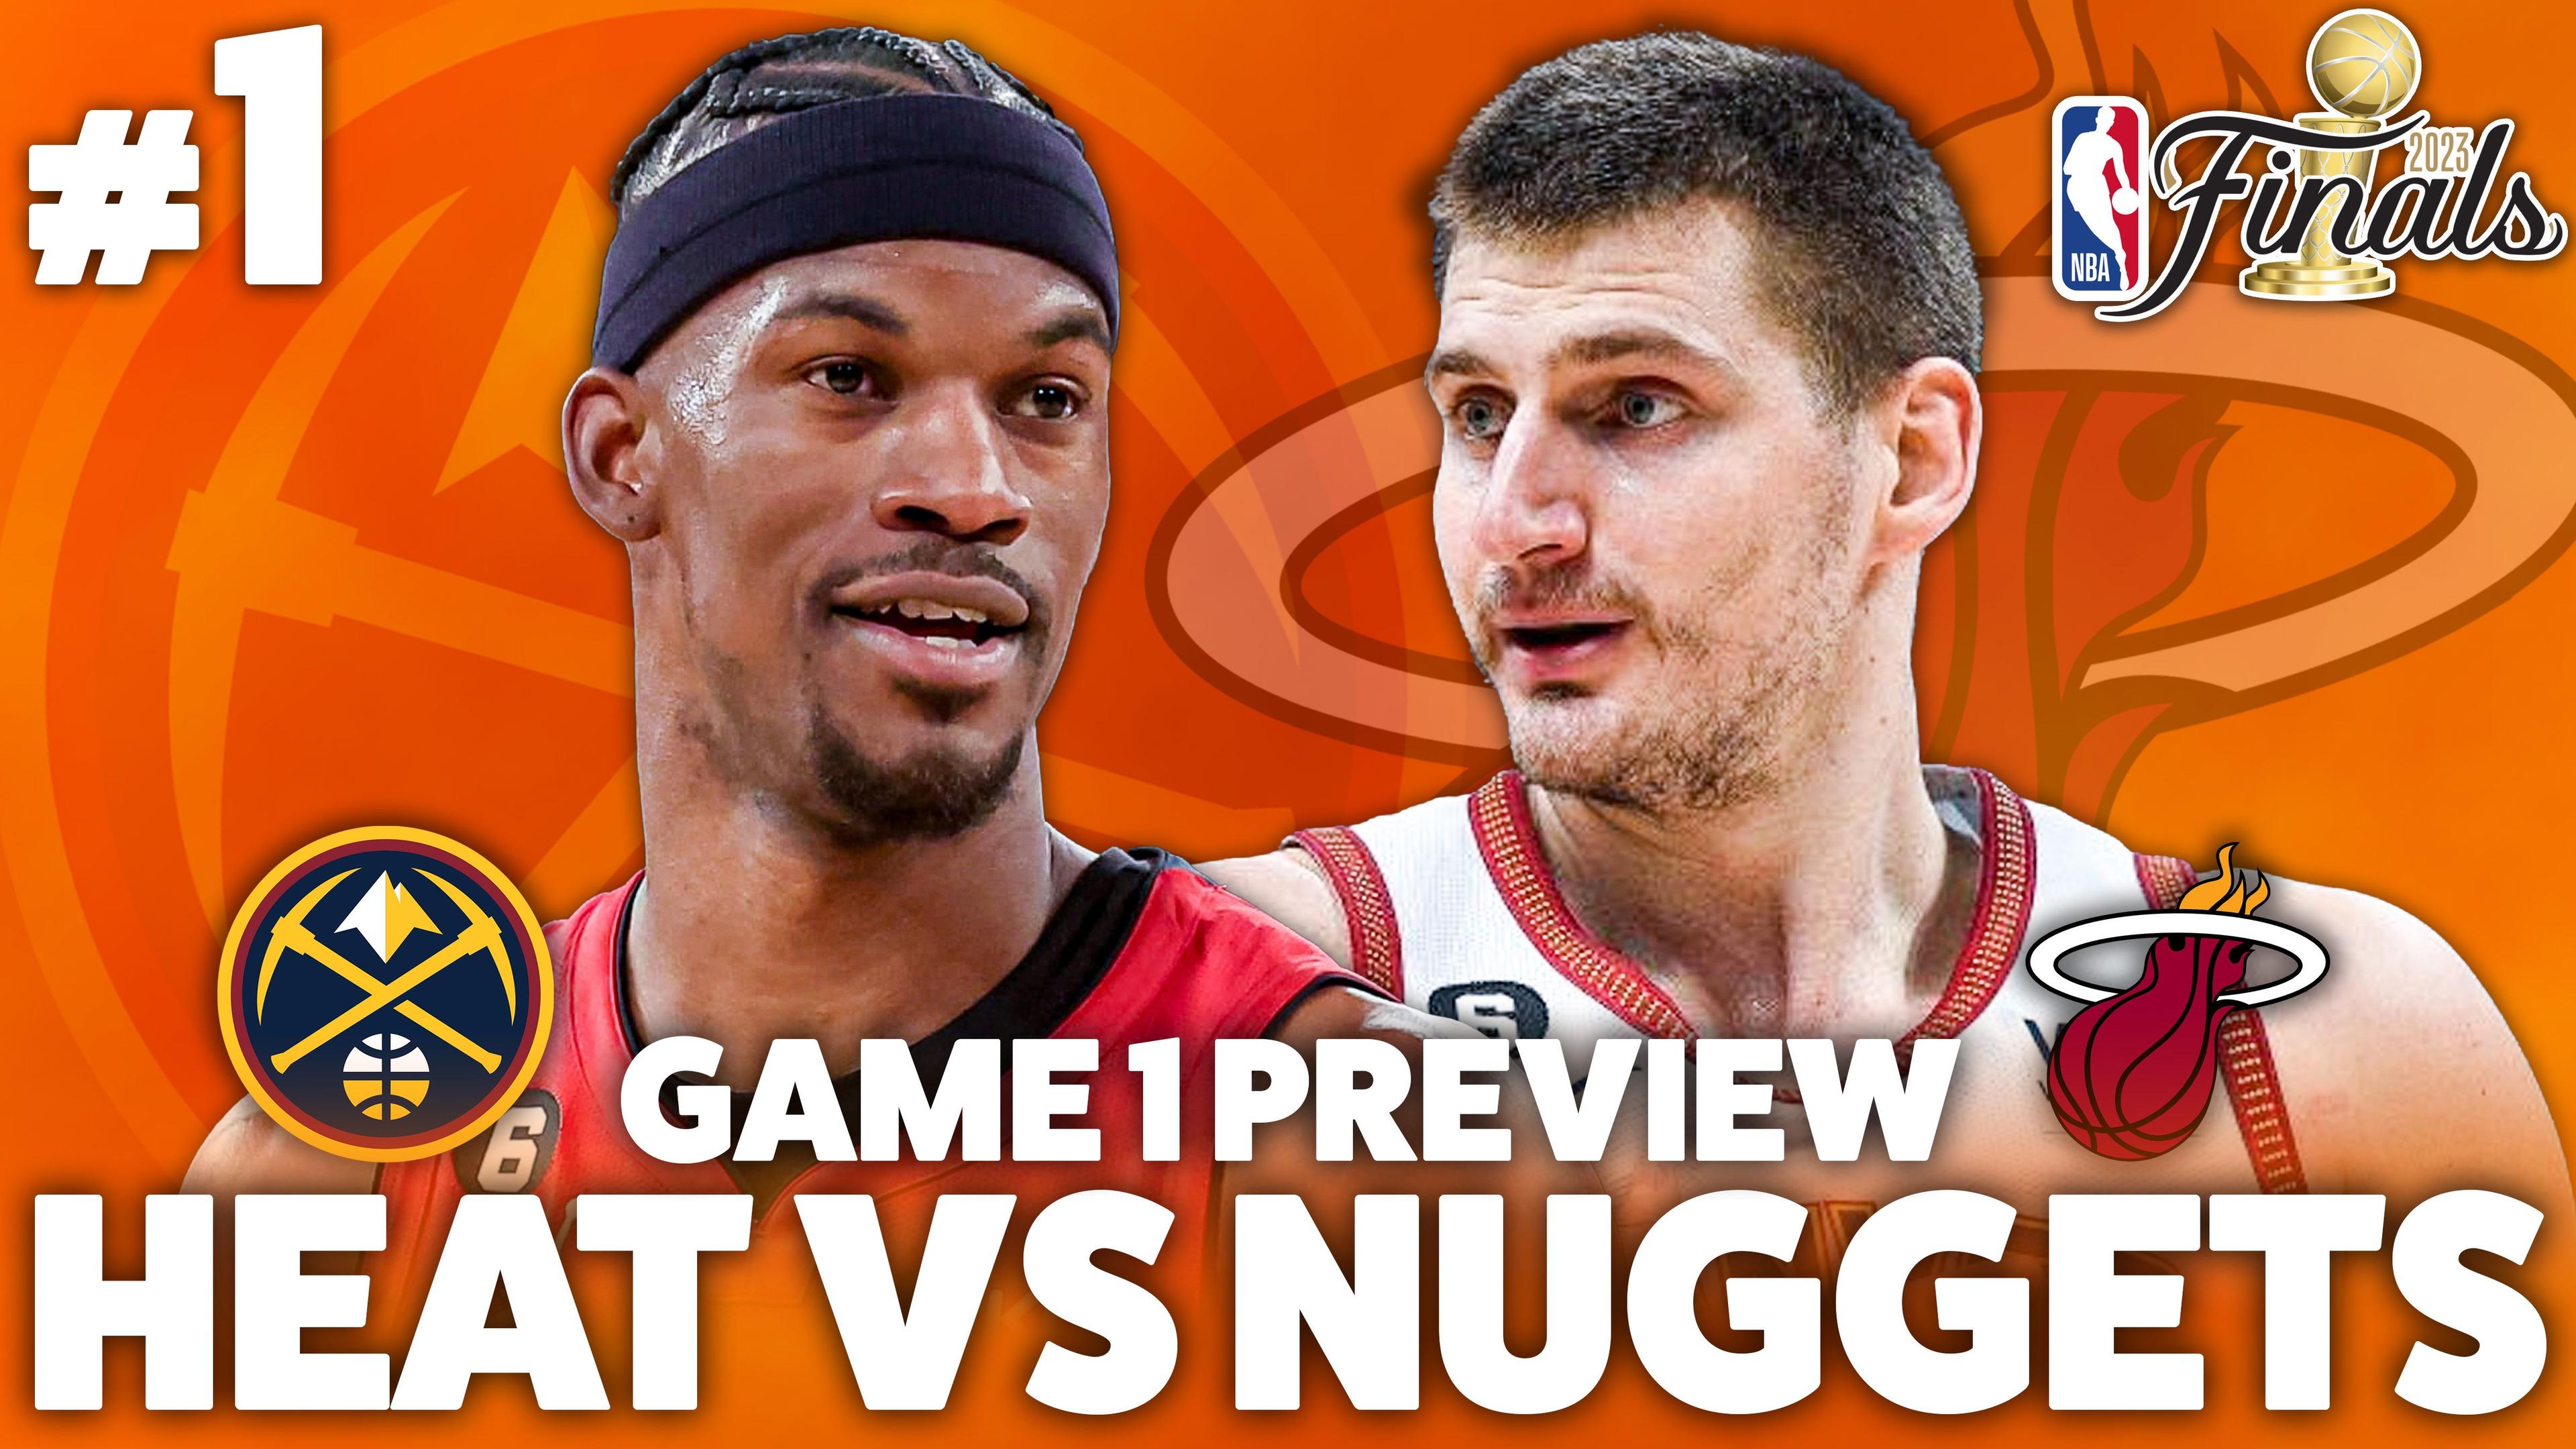 Nuggets vs Heat Game 1 Preview.jpg